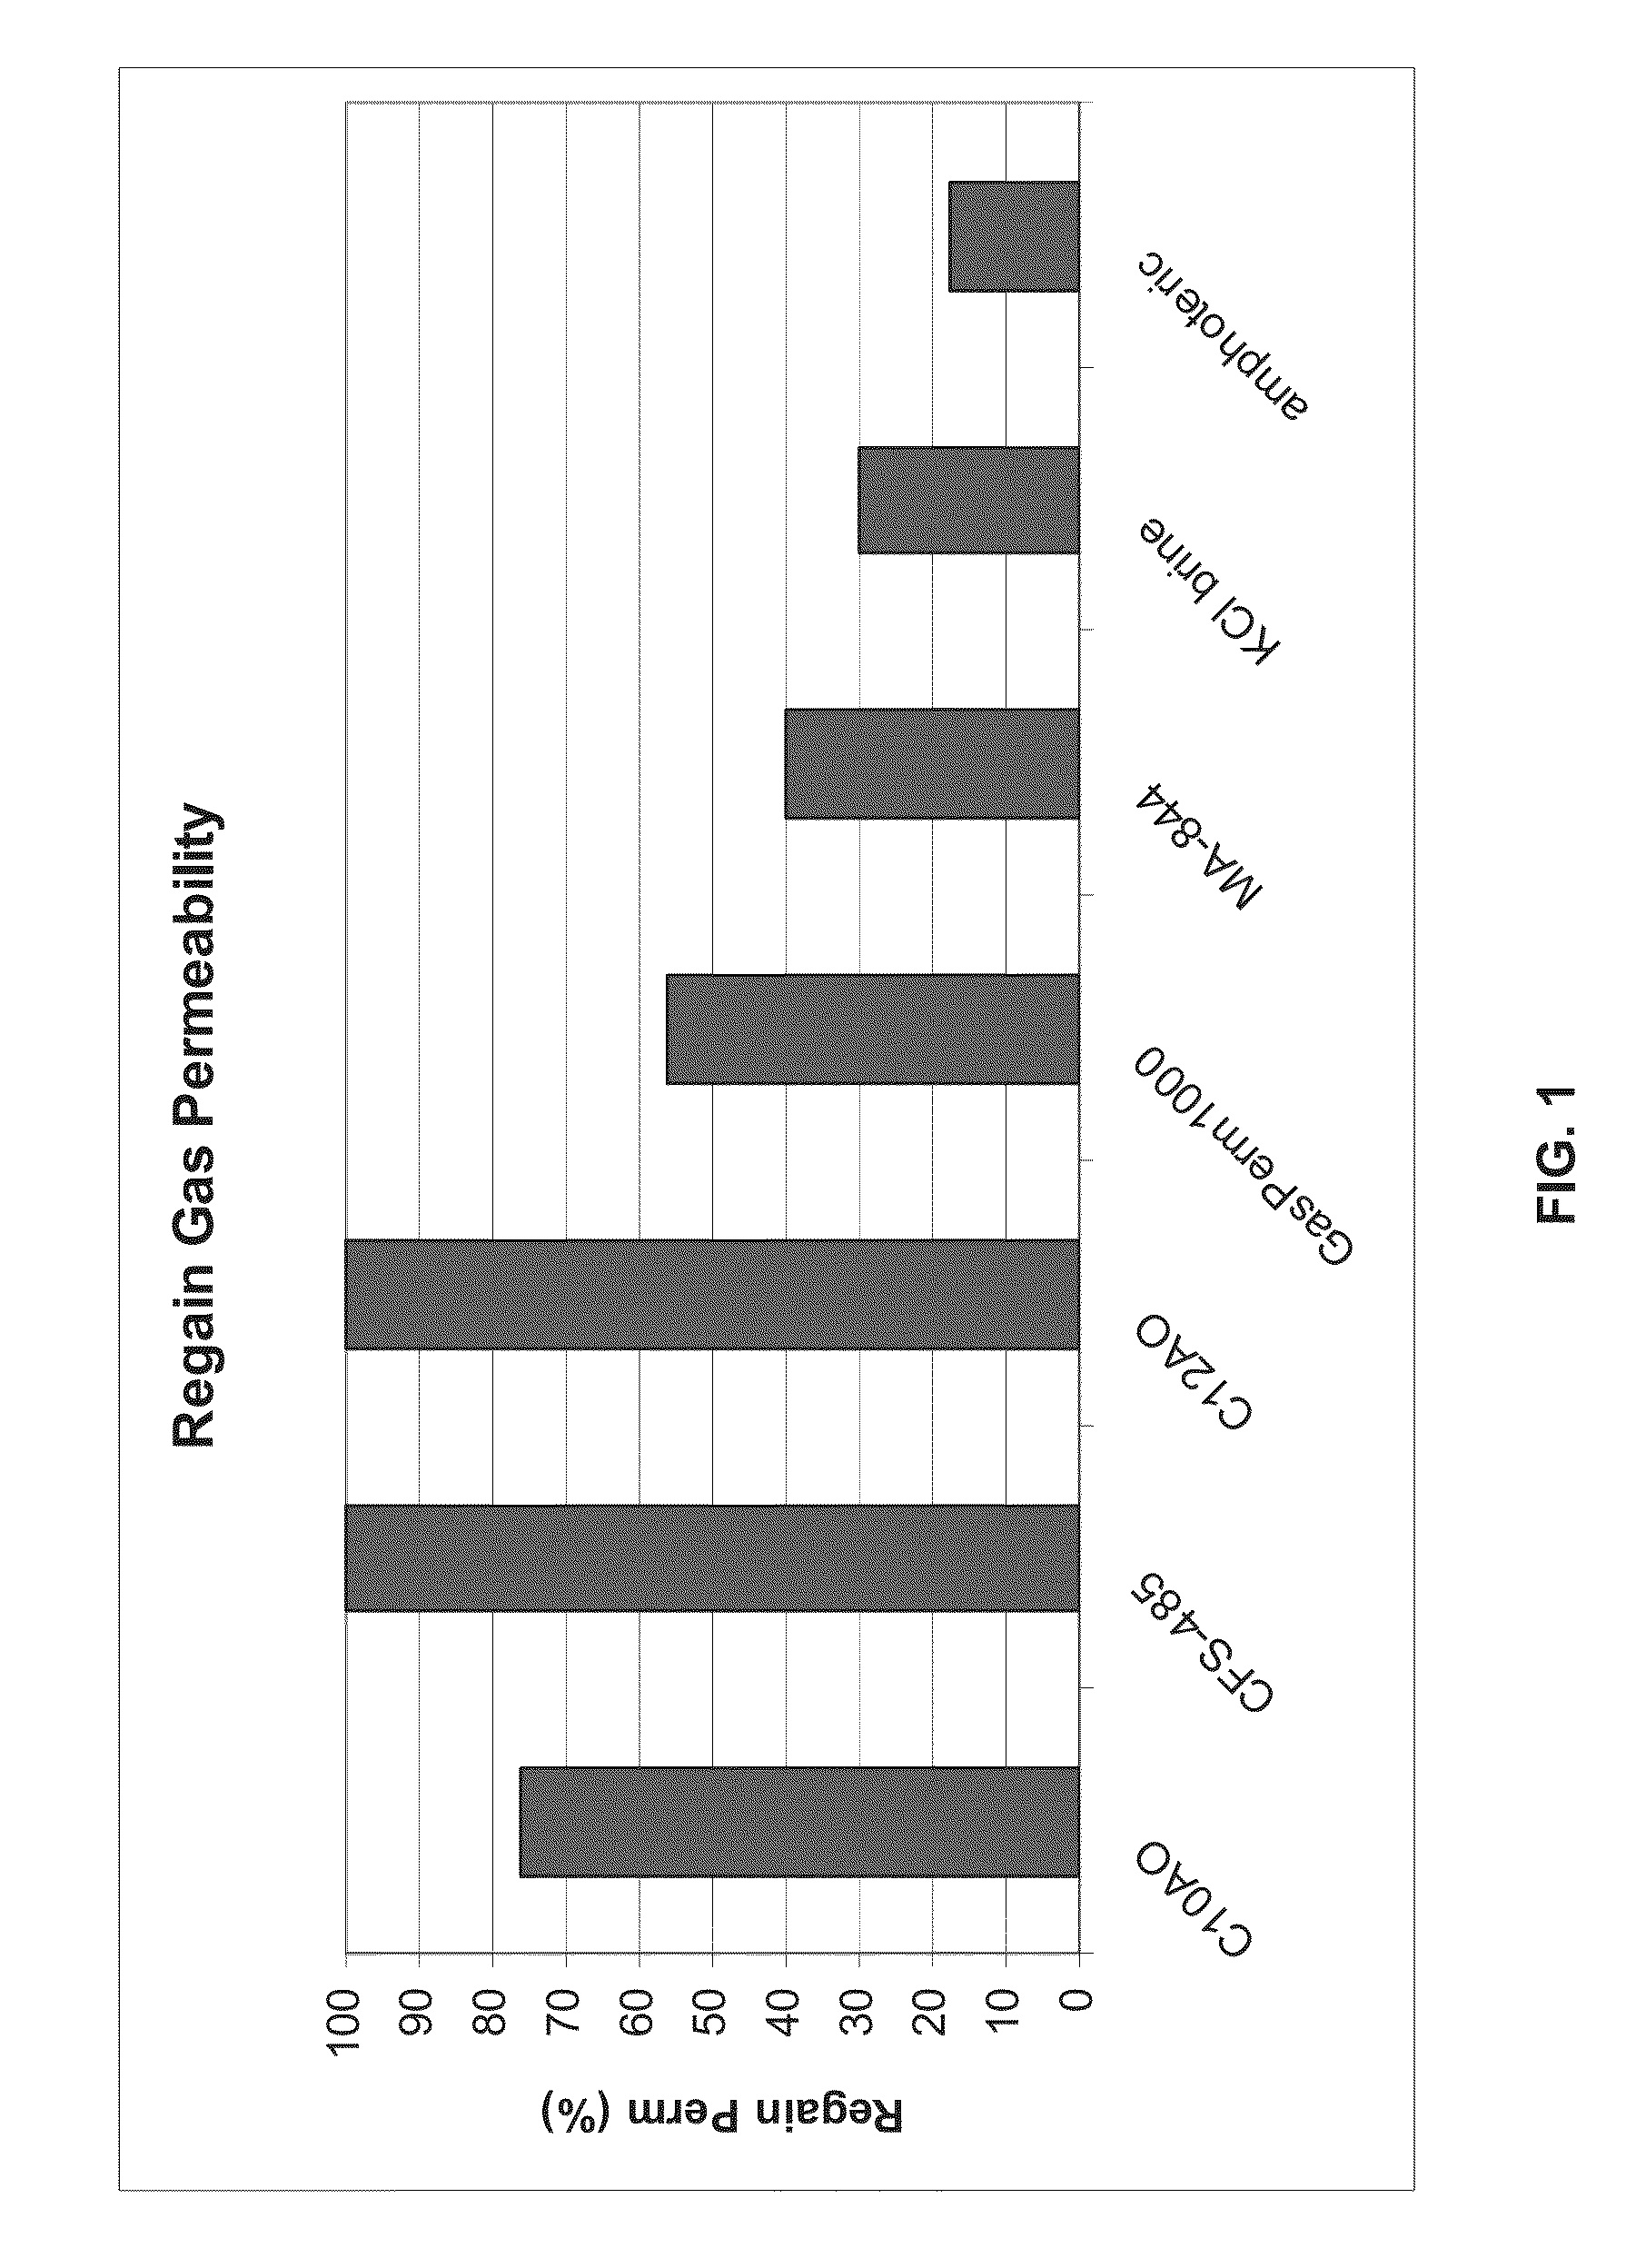 Surfactant Additives for Stimulating Subterranean Formation During Fracturing Operations